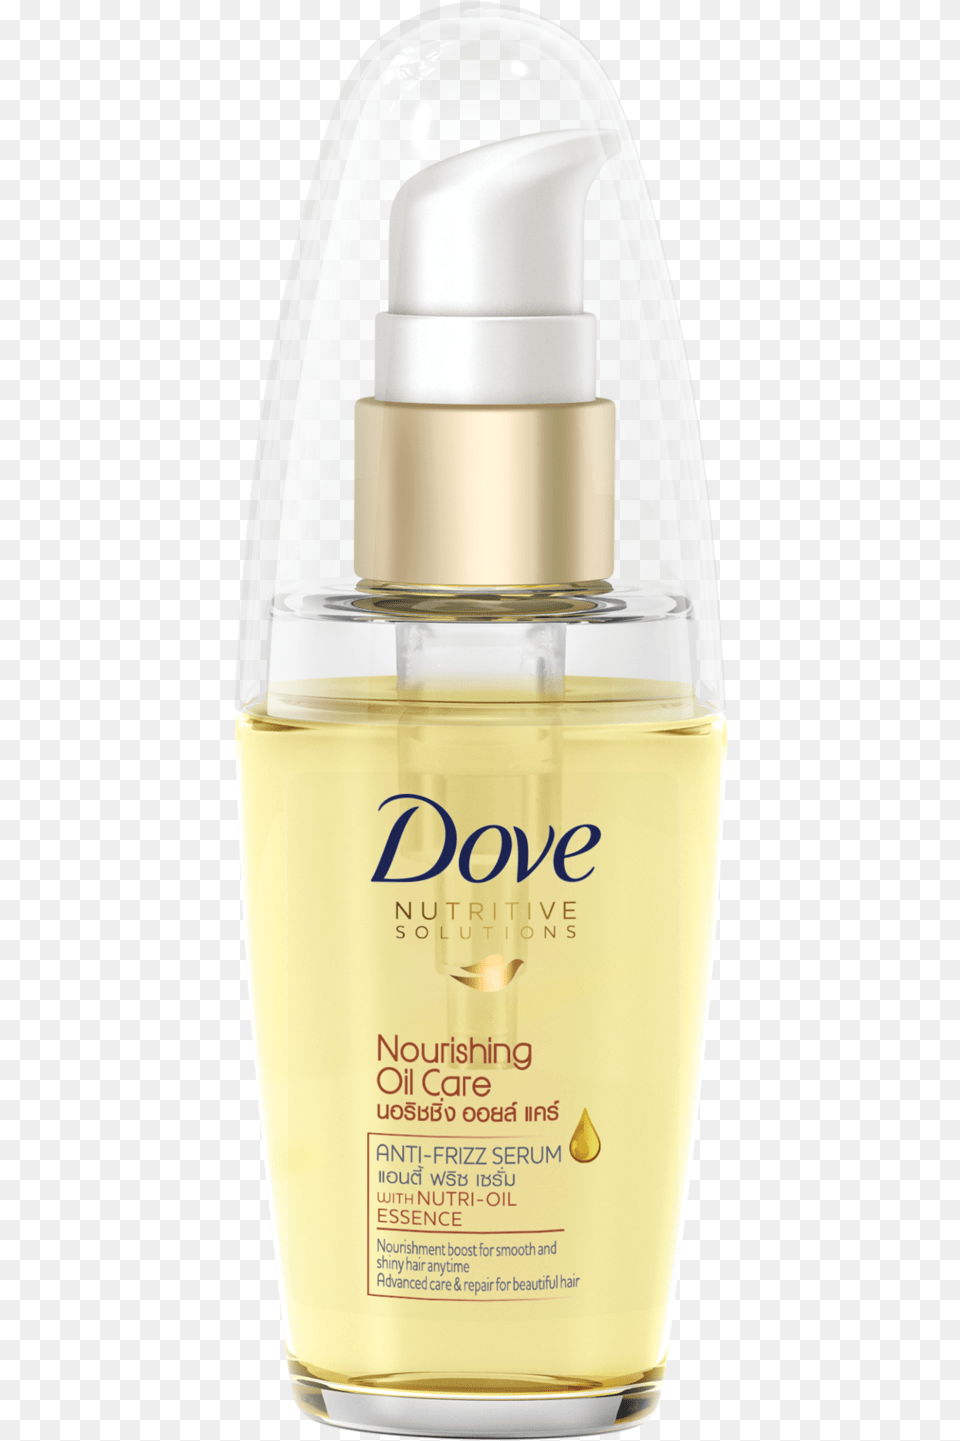 Dove Serum In Oil, Bottle, Cosmetics, Perfume Free Png